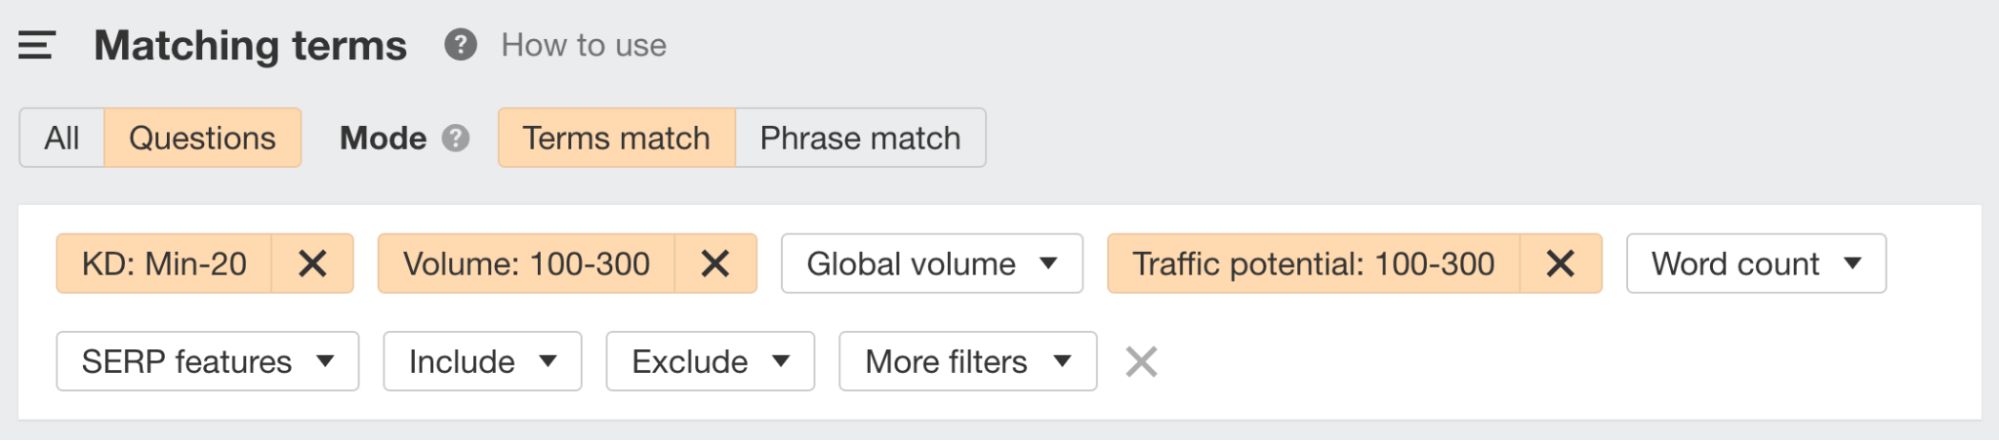 Example of using various filters to find long tail keywords.